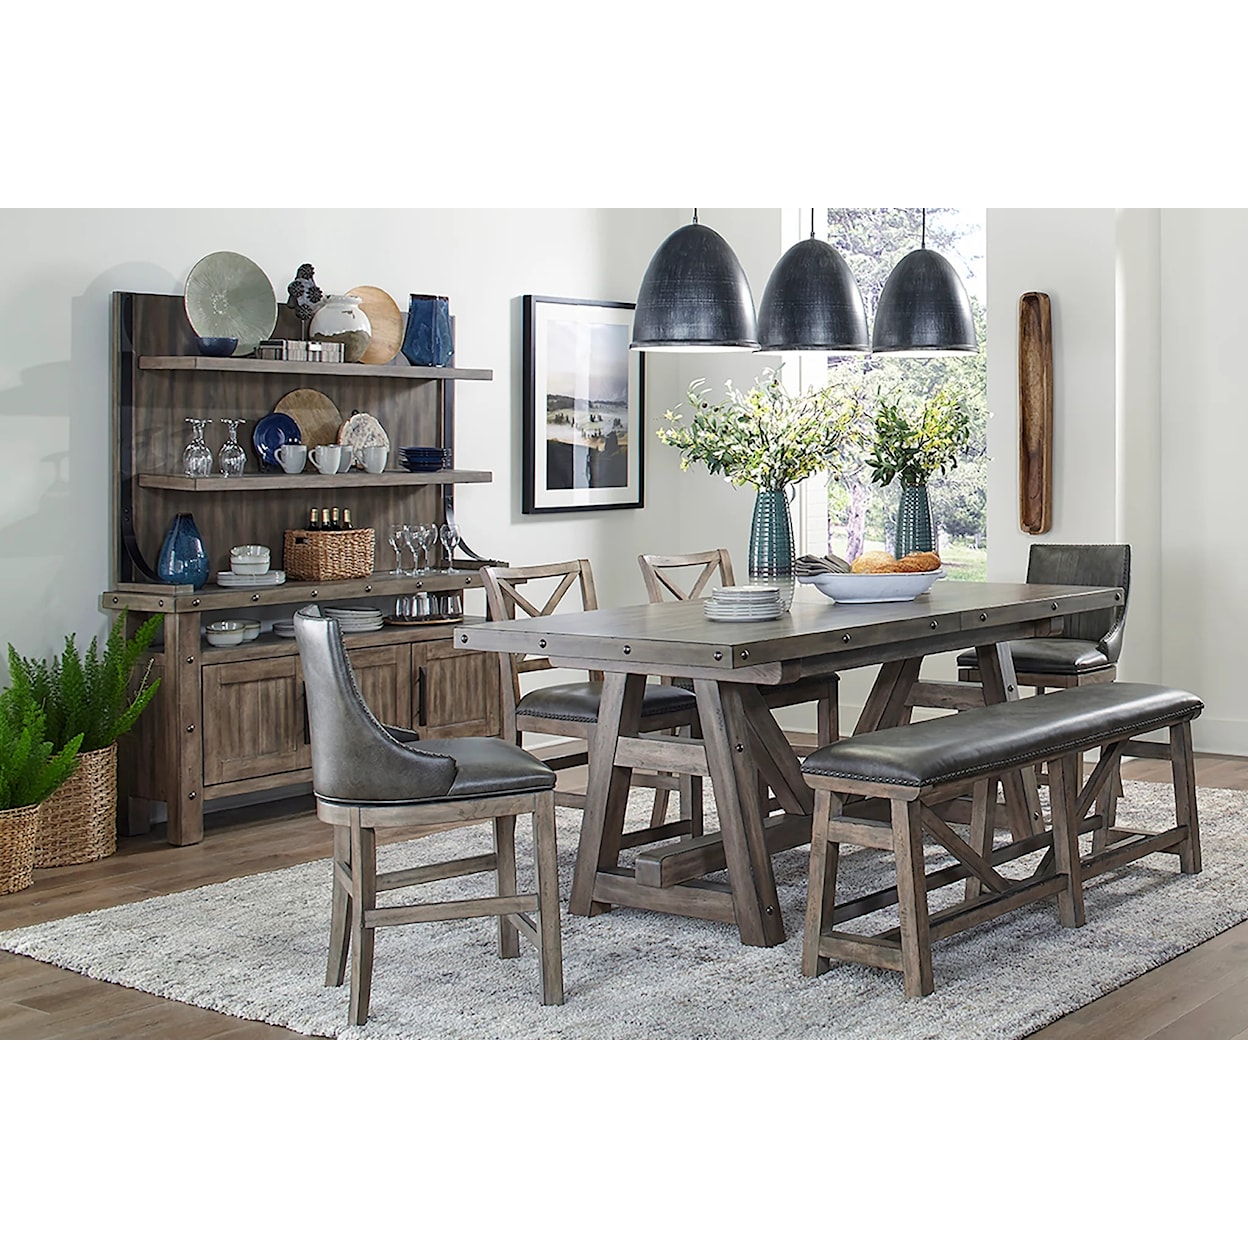 Paramount Furniture Lodge 9-Piece Counter Height Table Set